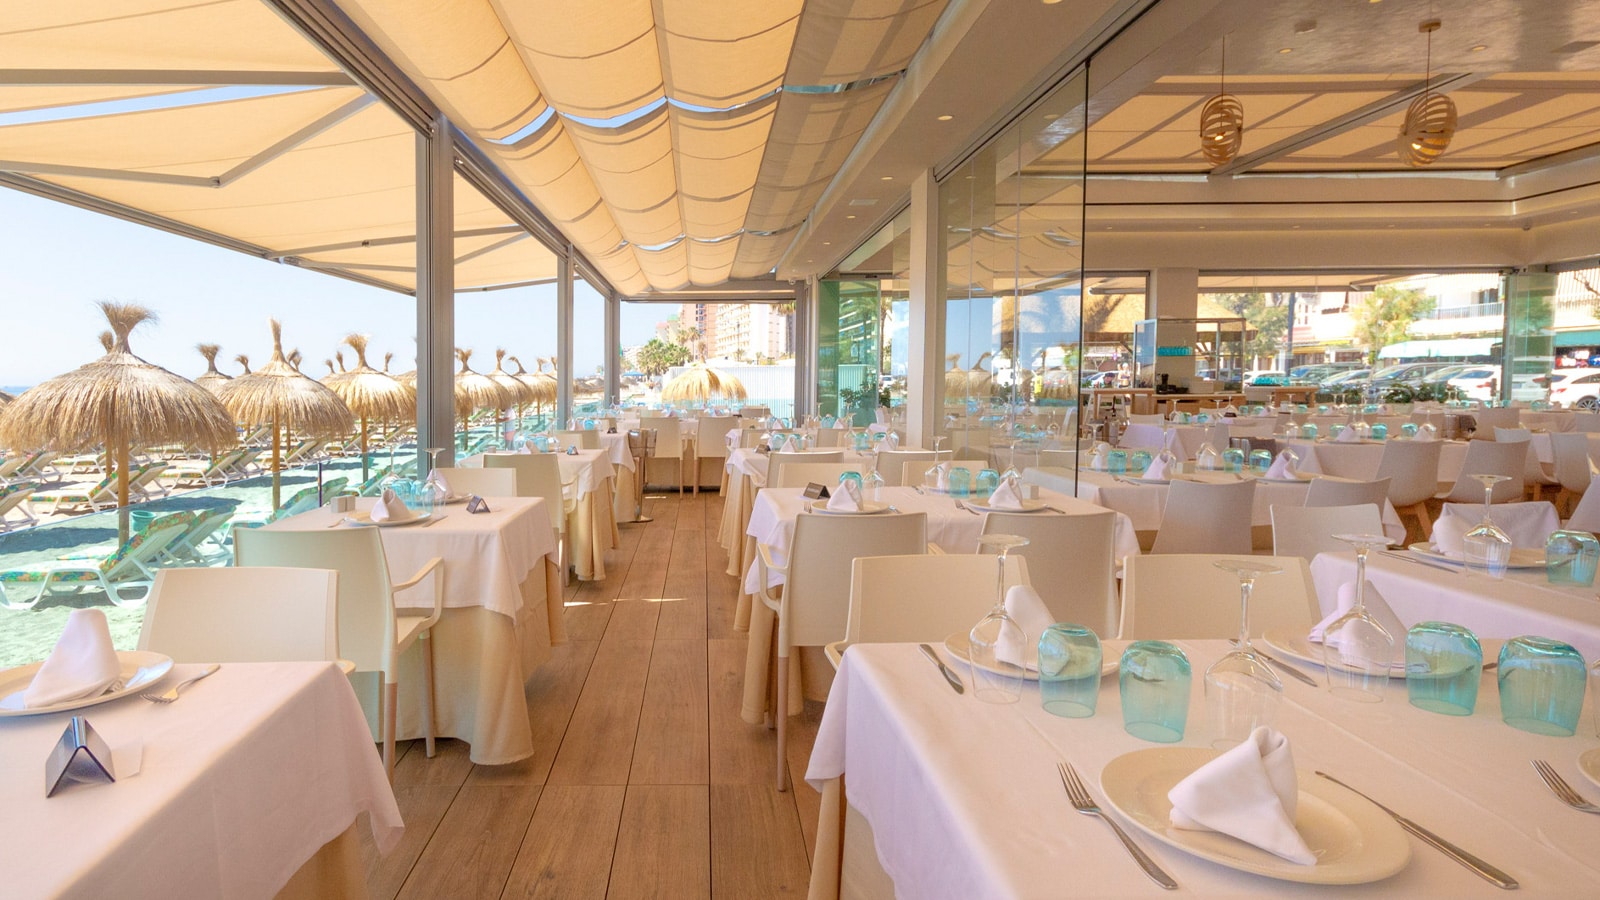 The authentic flavour of the Mediterranean comes to La Caracola's tables with Porcelanosa